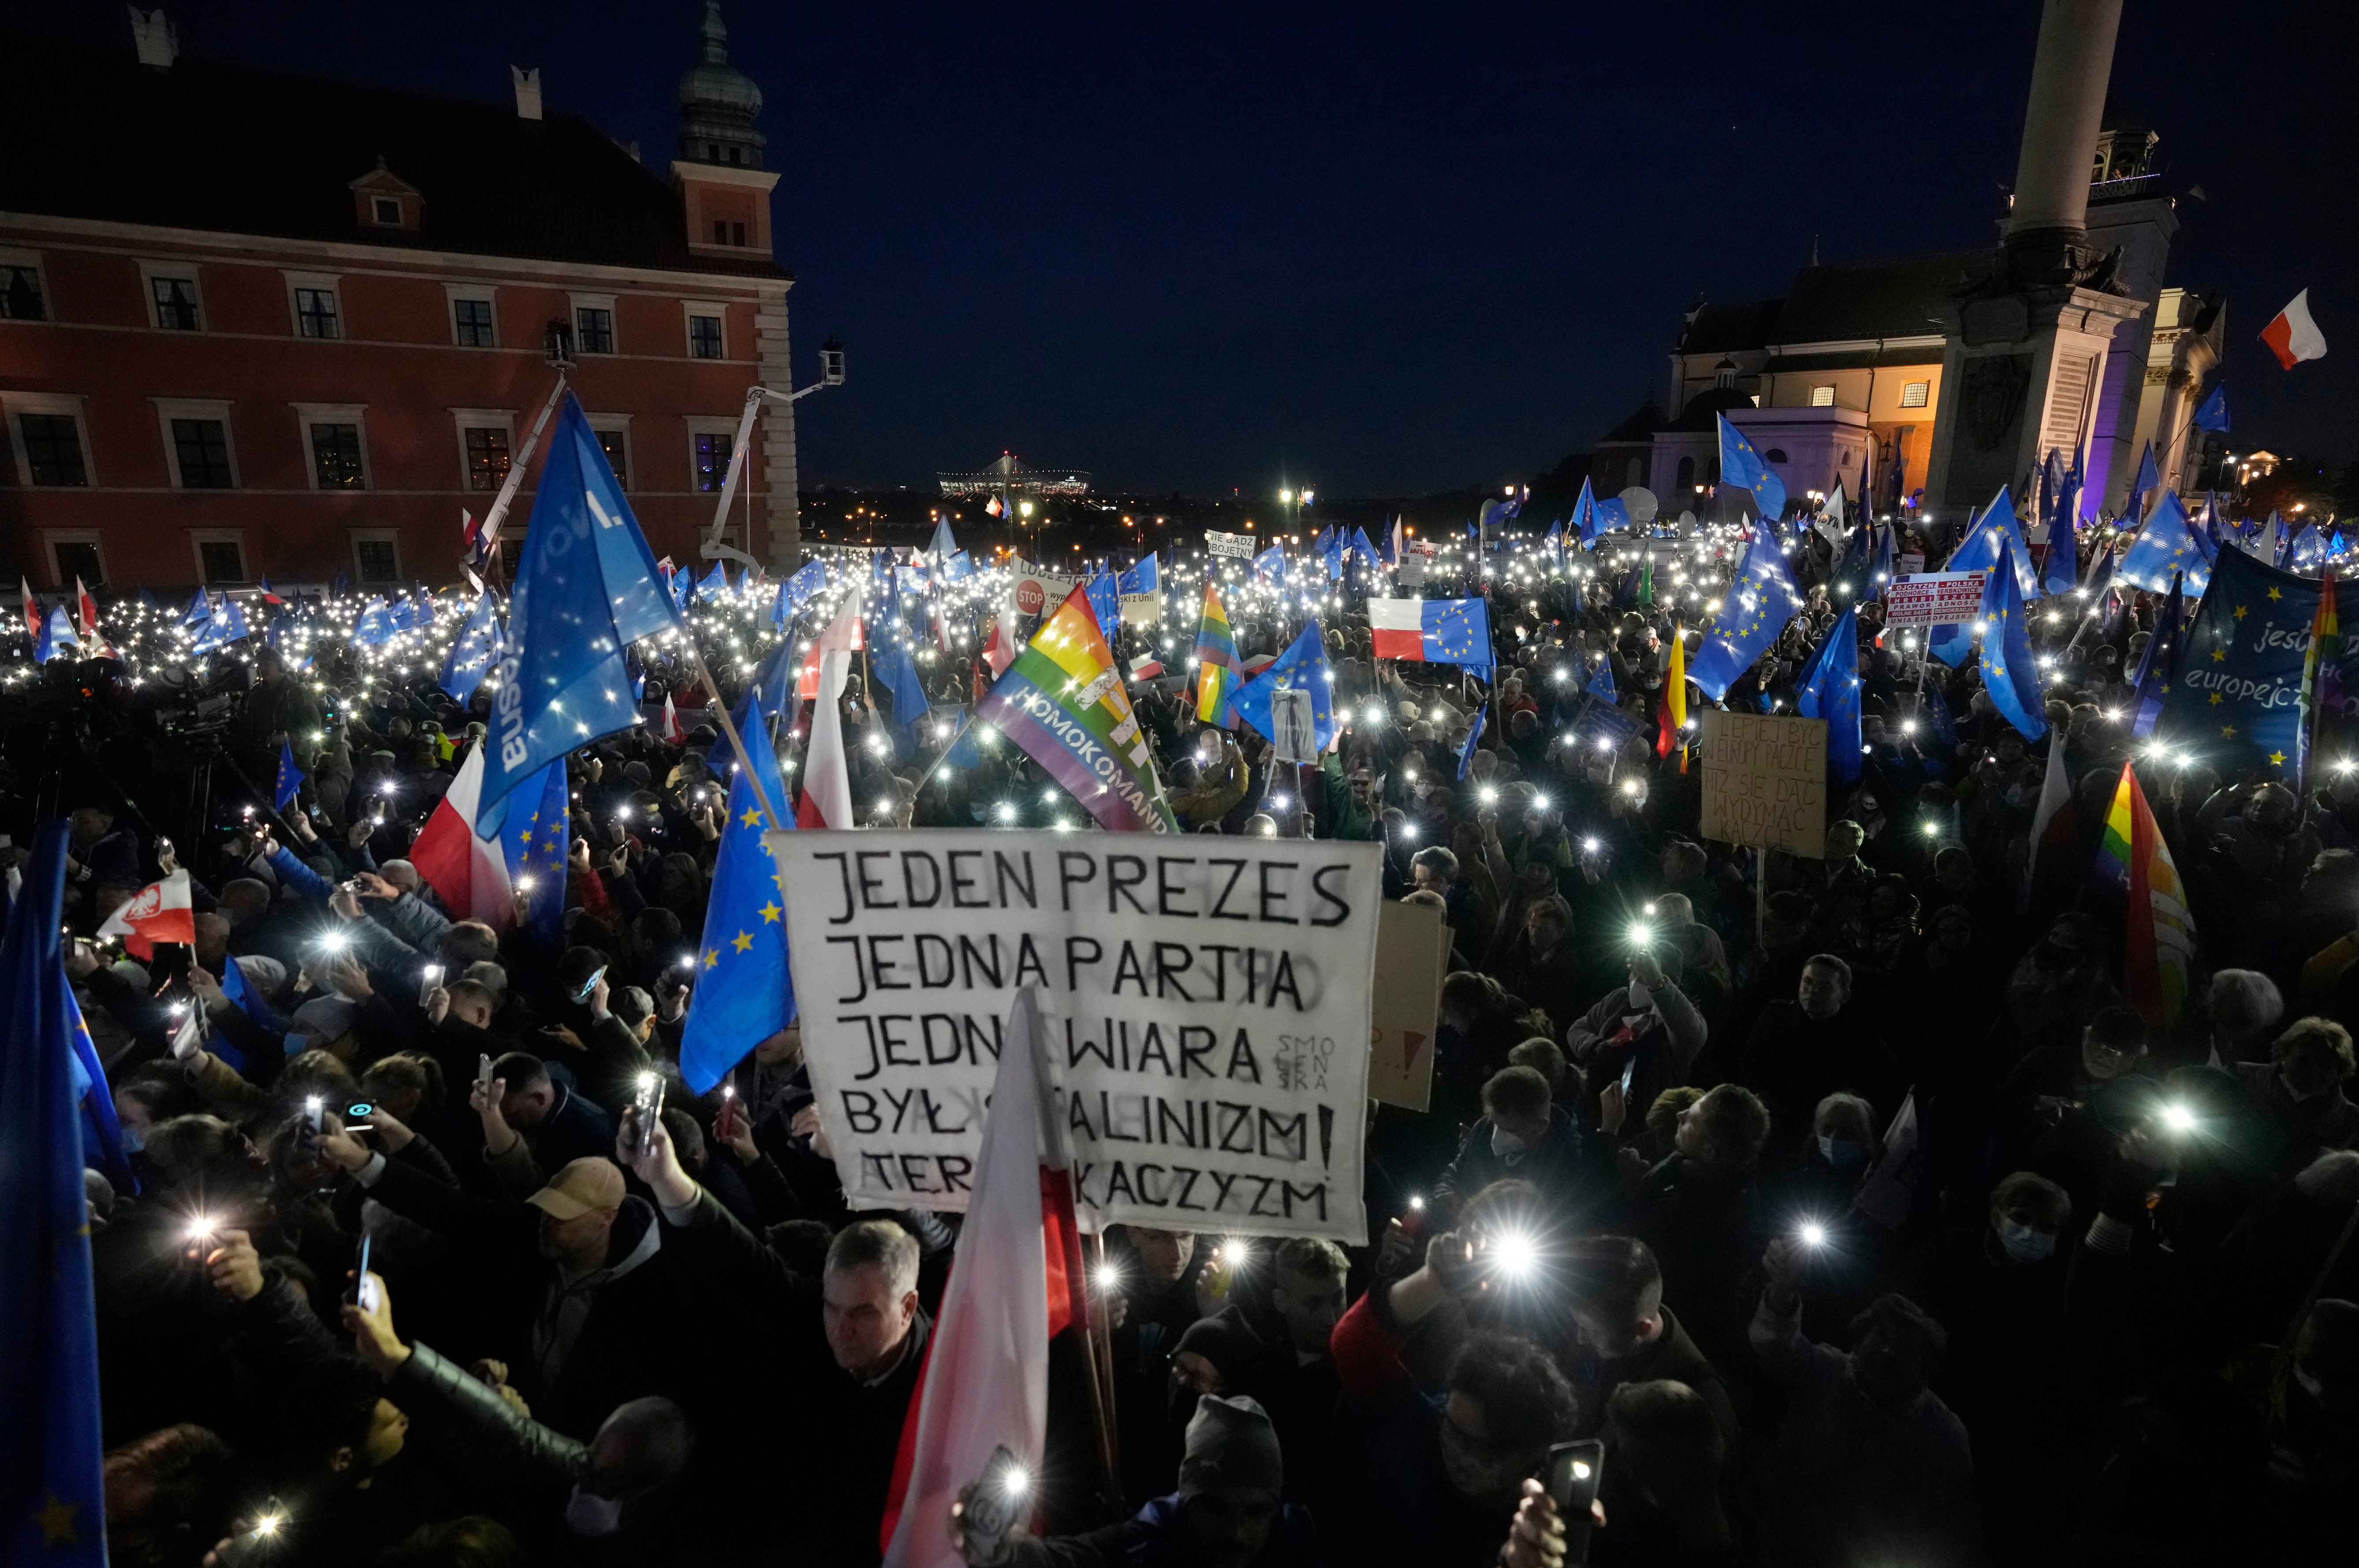 <p>One protester holds up a sign that reads: ‘One leader, one party, one creed. Once it was Stalinism, now it it’s Kaczynski-ism’ </p>